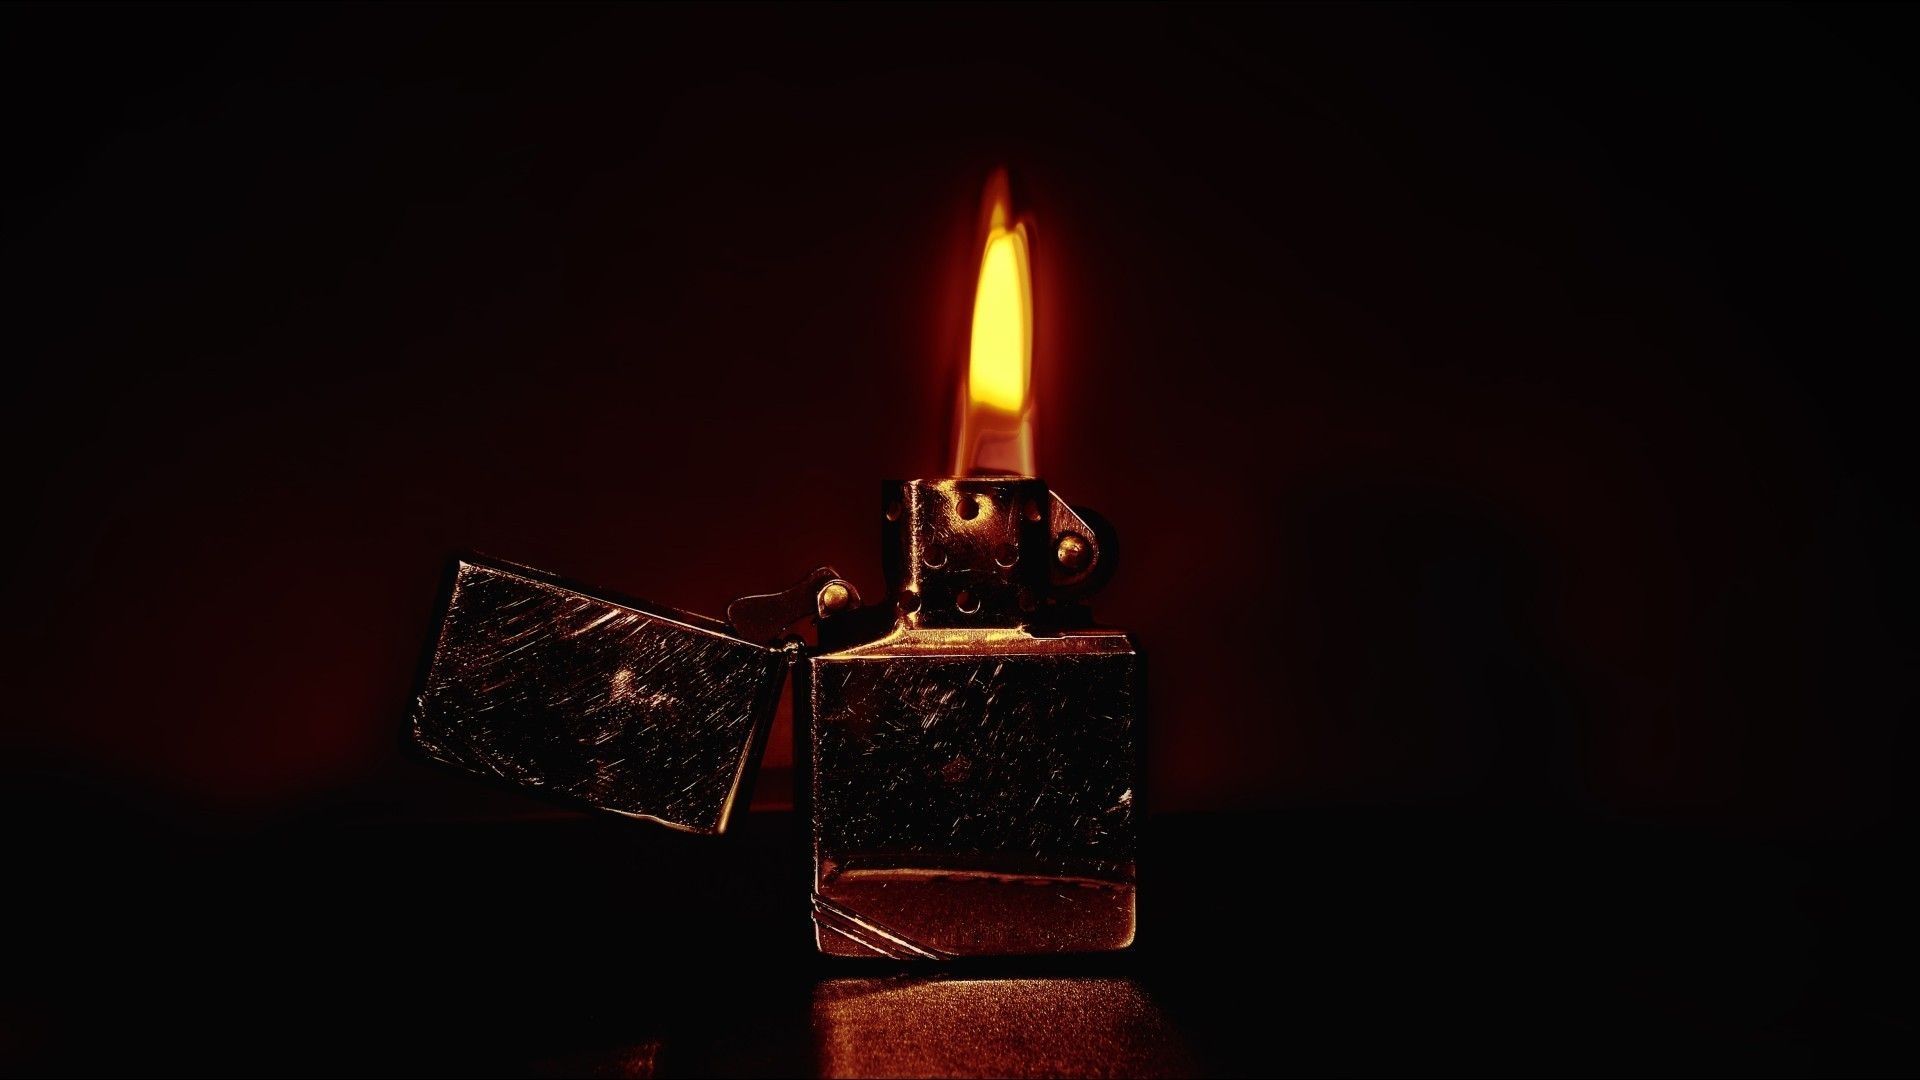 [55+] Free Full Hd Wallpapers Of 2015 Zippo Lighters on ...